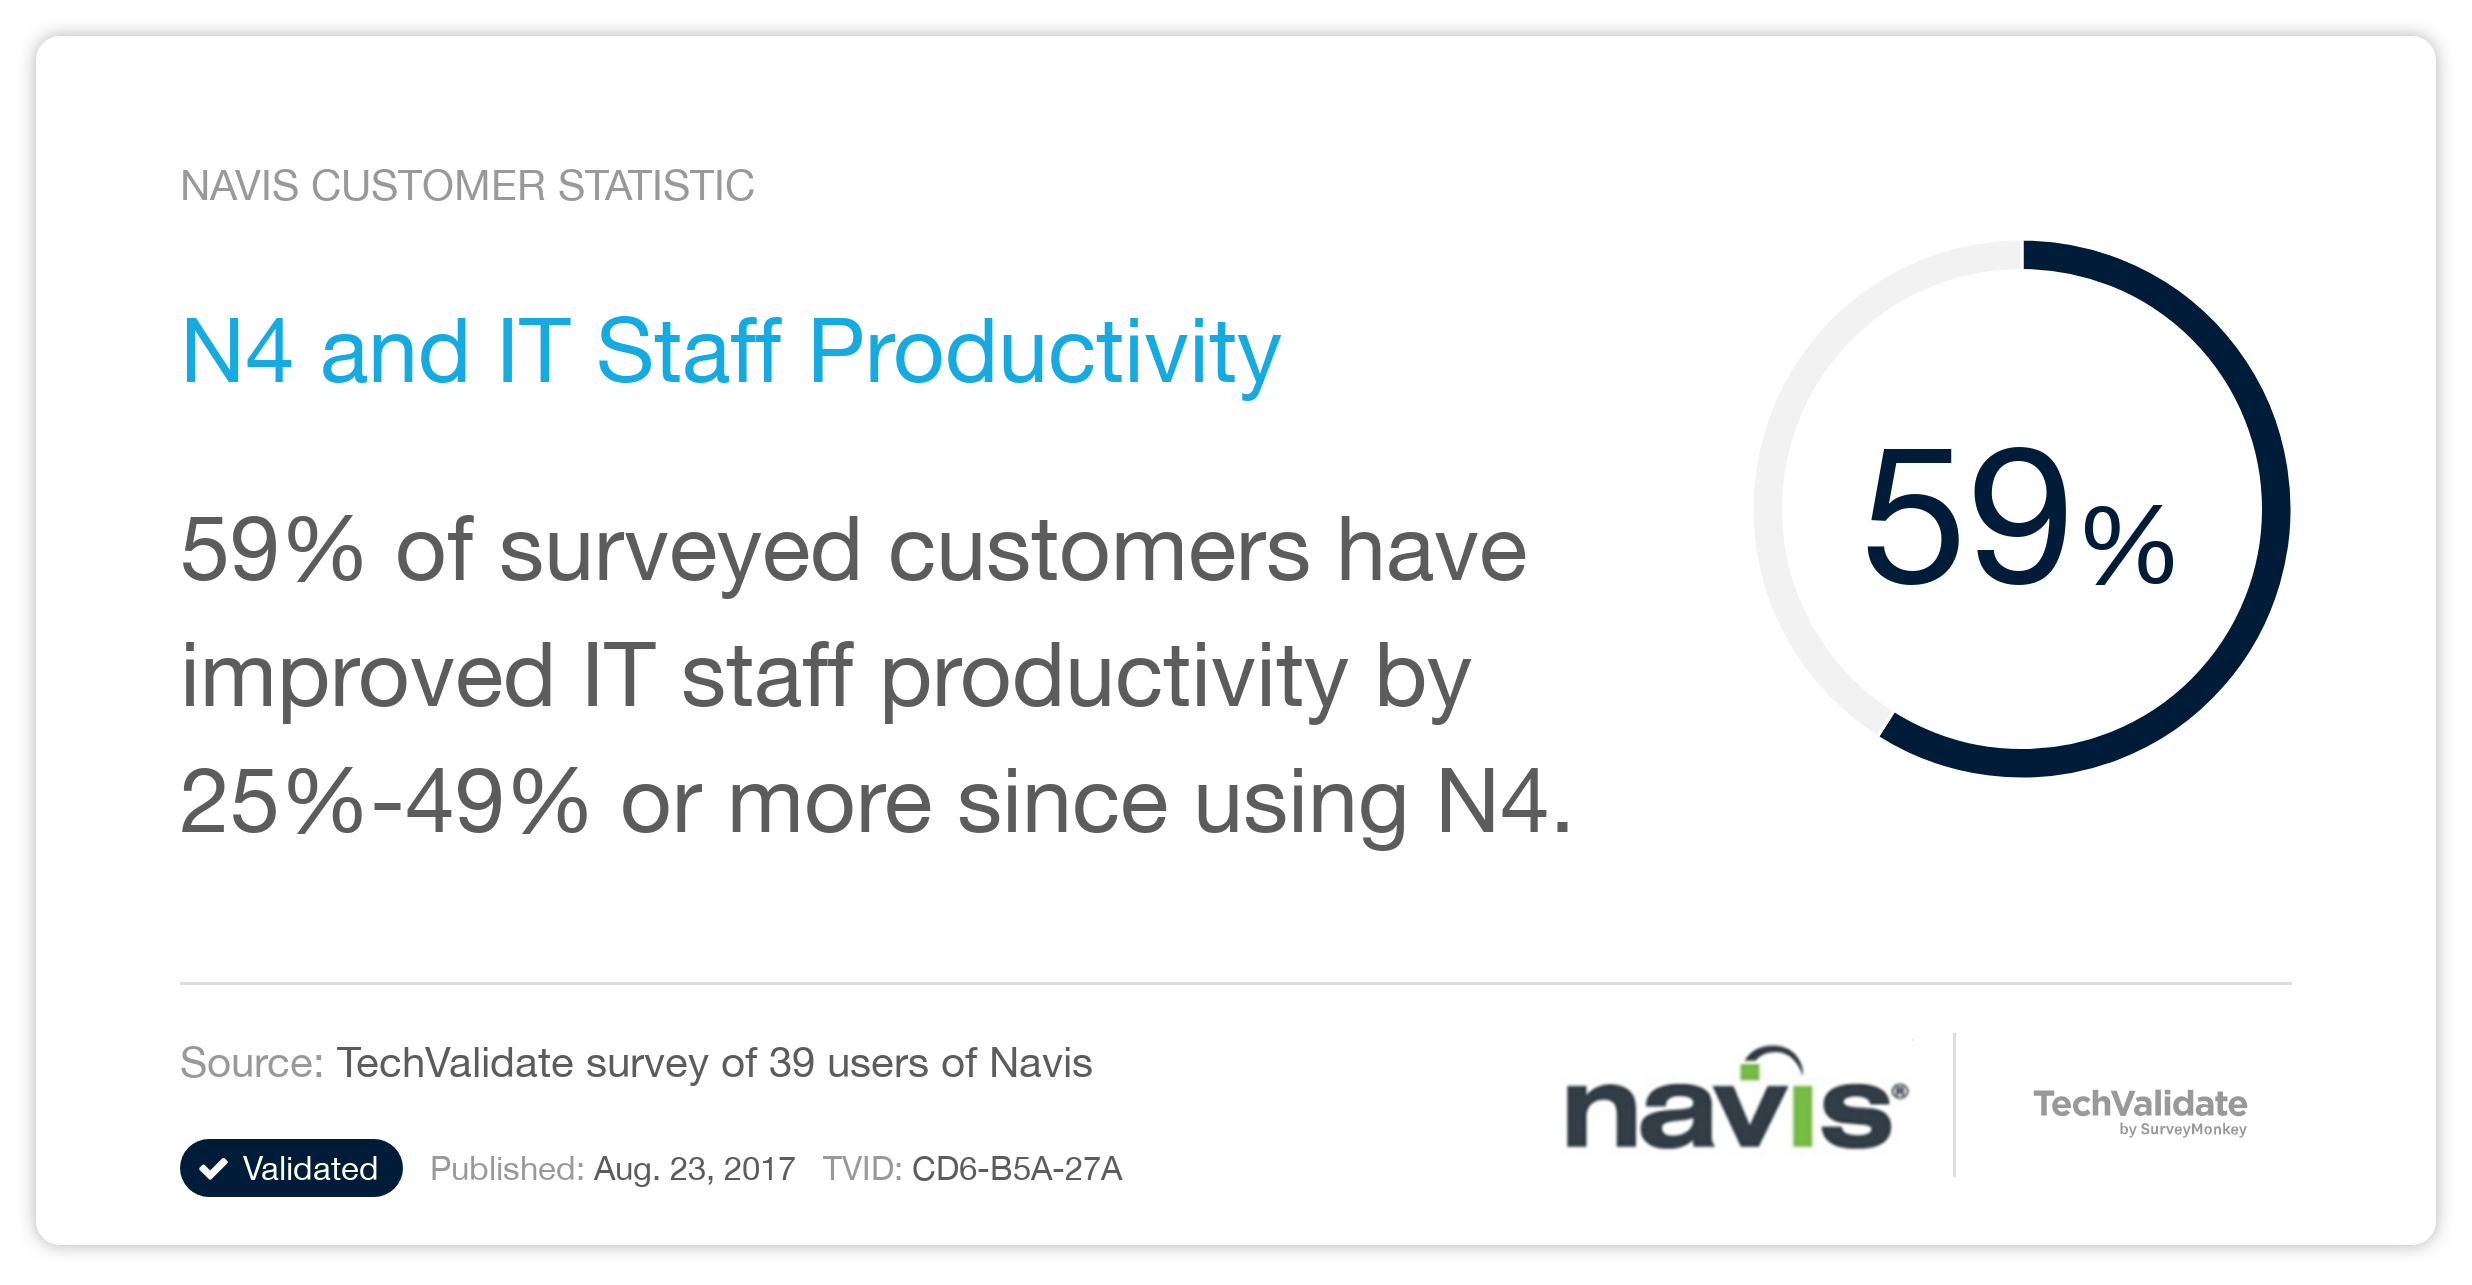 N4 and IT Staff Productivity